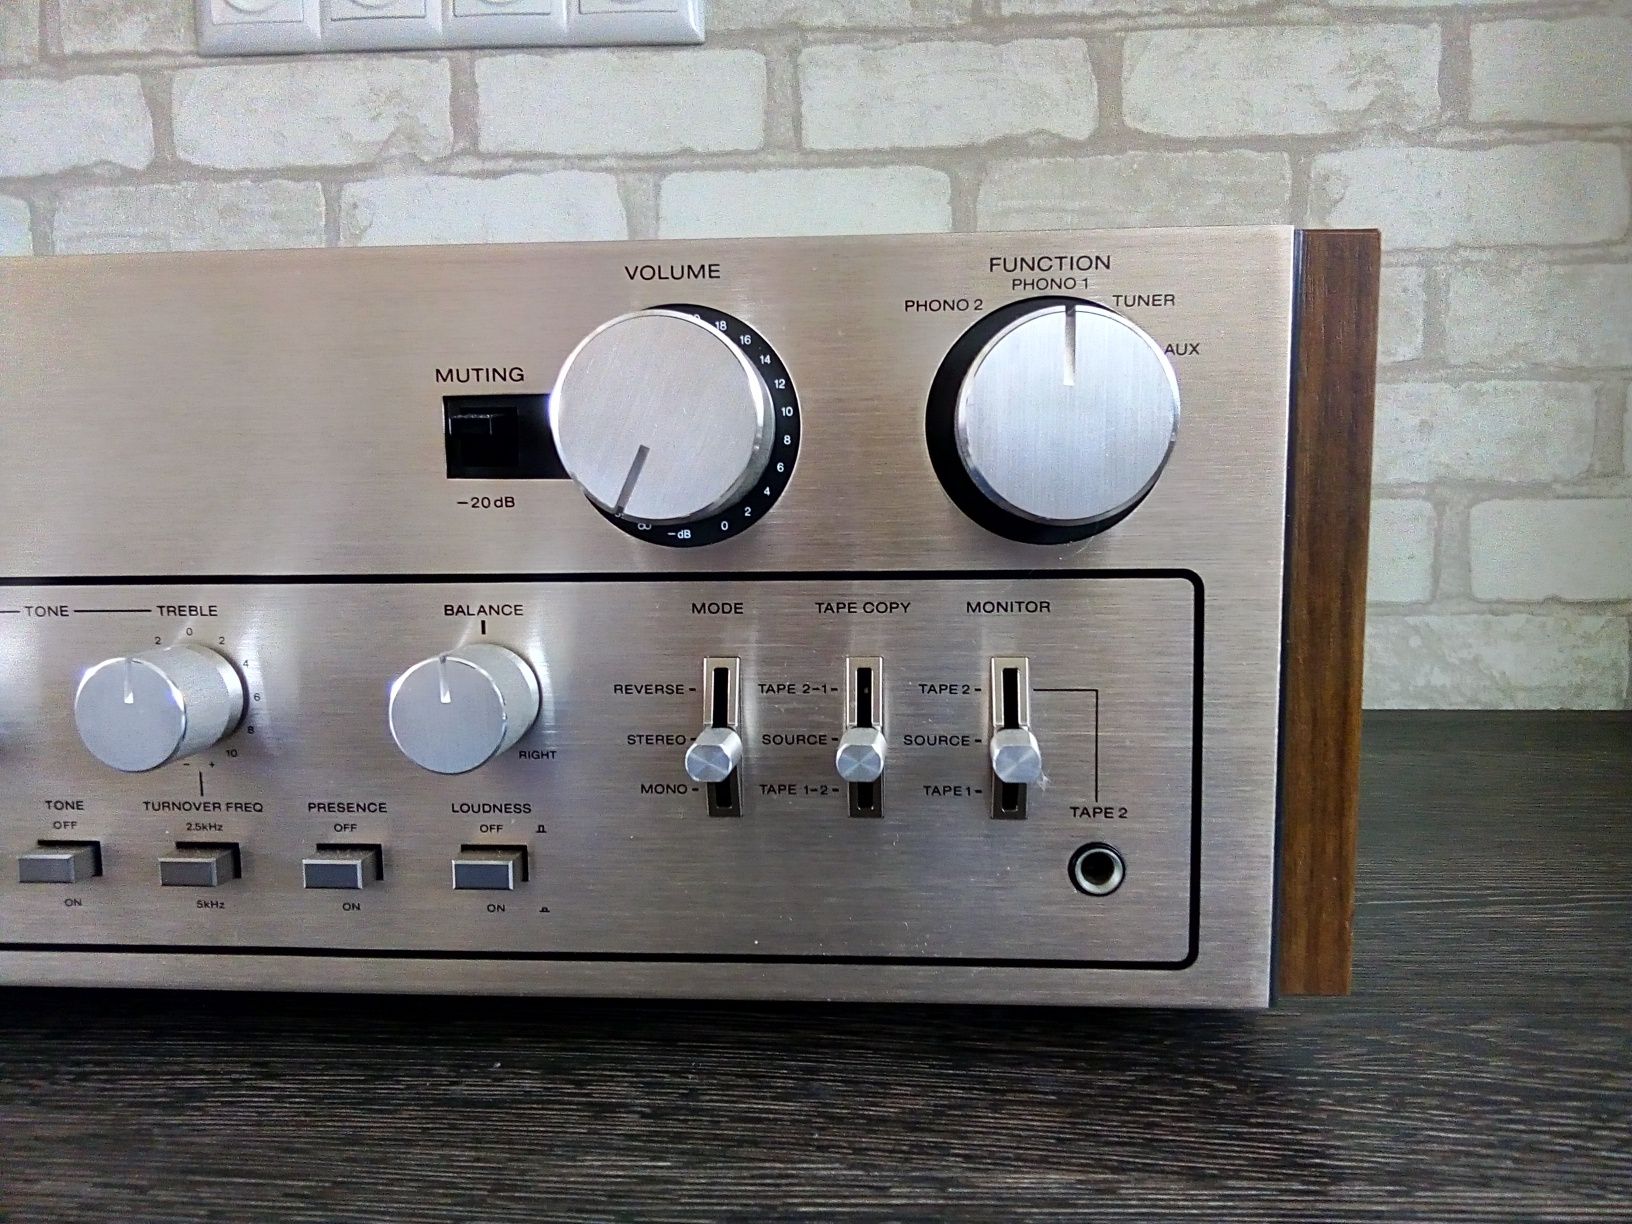 Sony TA-3650 Integrated Stereo Amplifier 1976-78